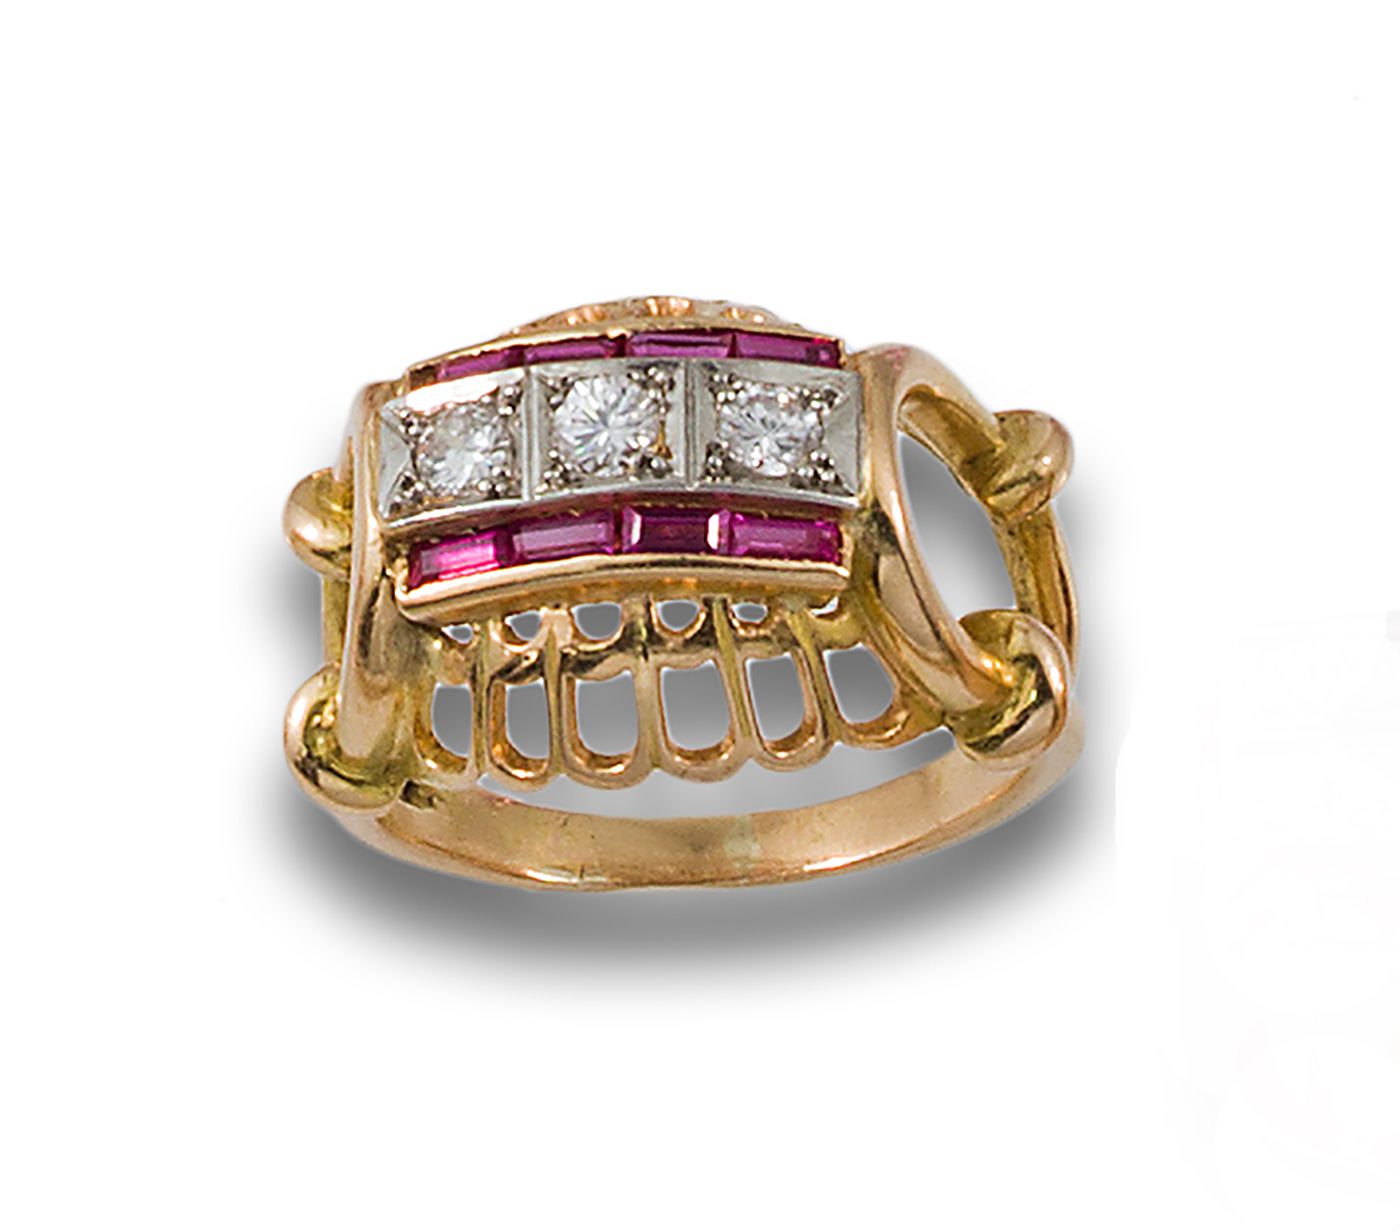 RING, 1940S, IN GOLD, DIAMONDS AND SYNTHETIC RUBIES Bague, années 1940, en or ja&hellip;